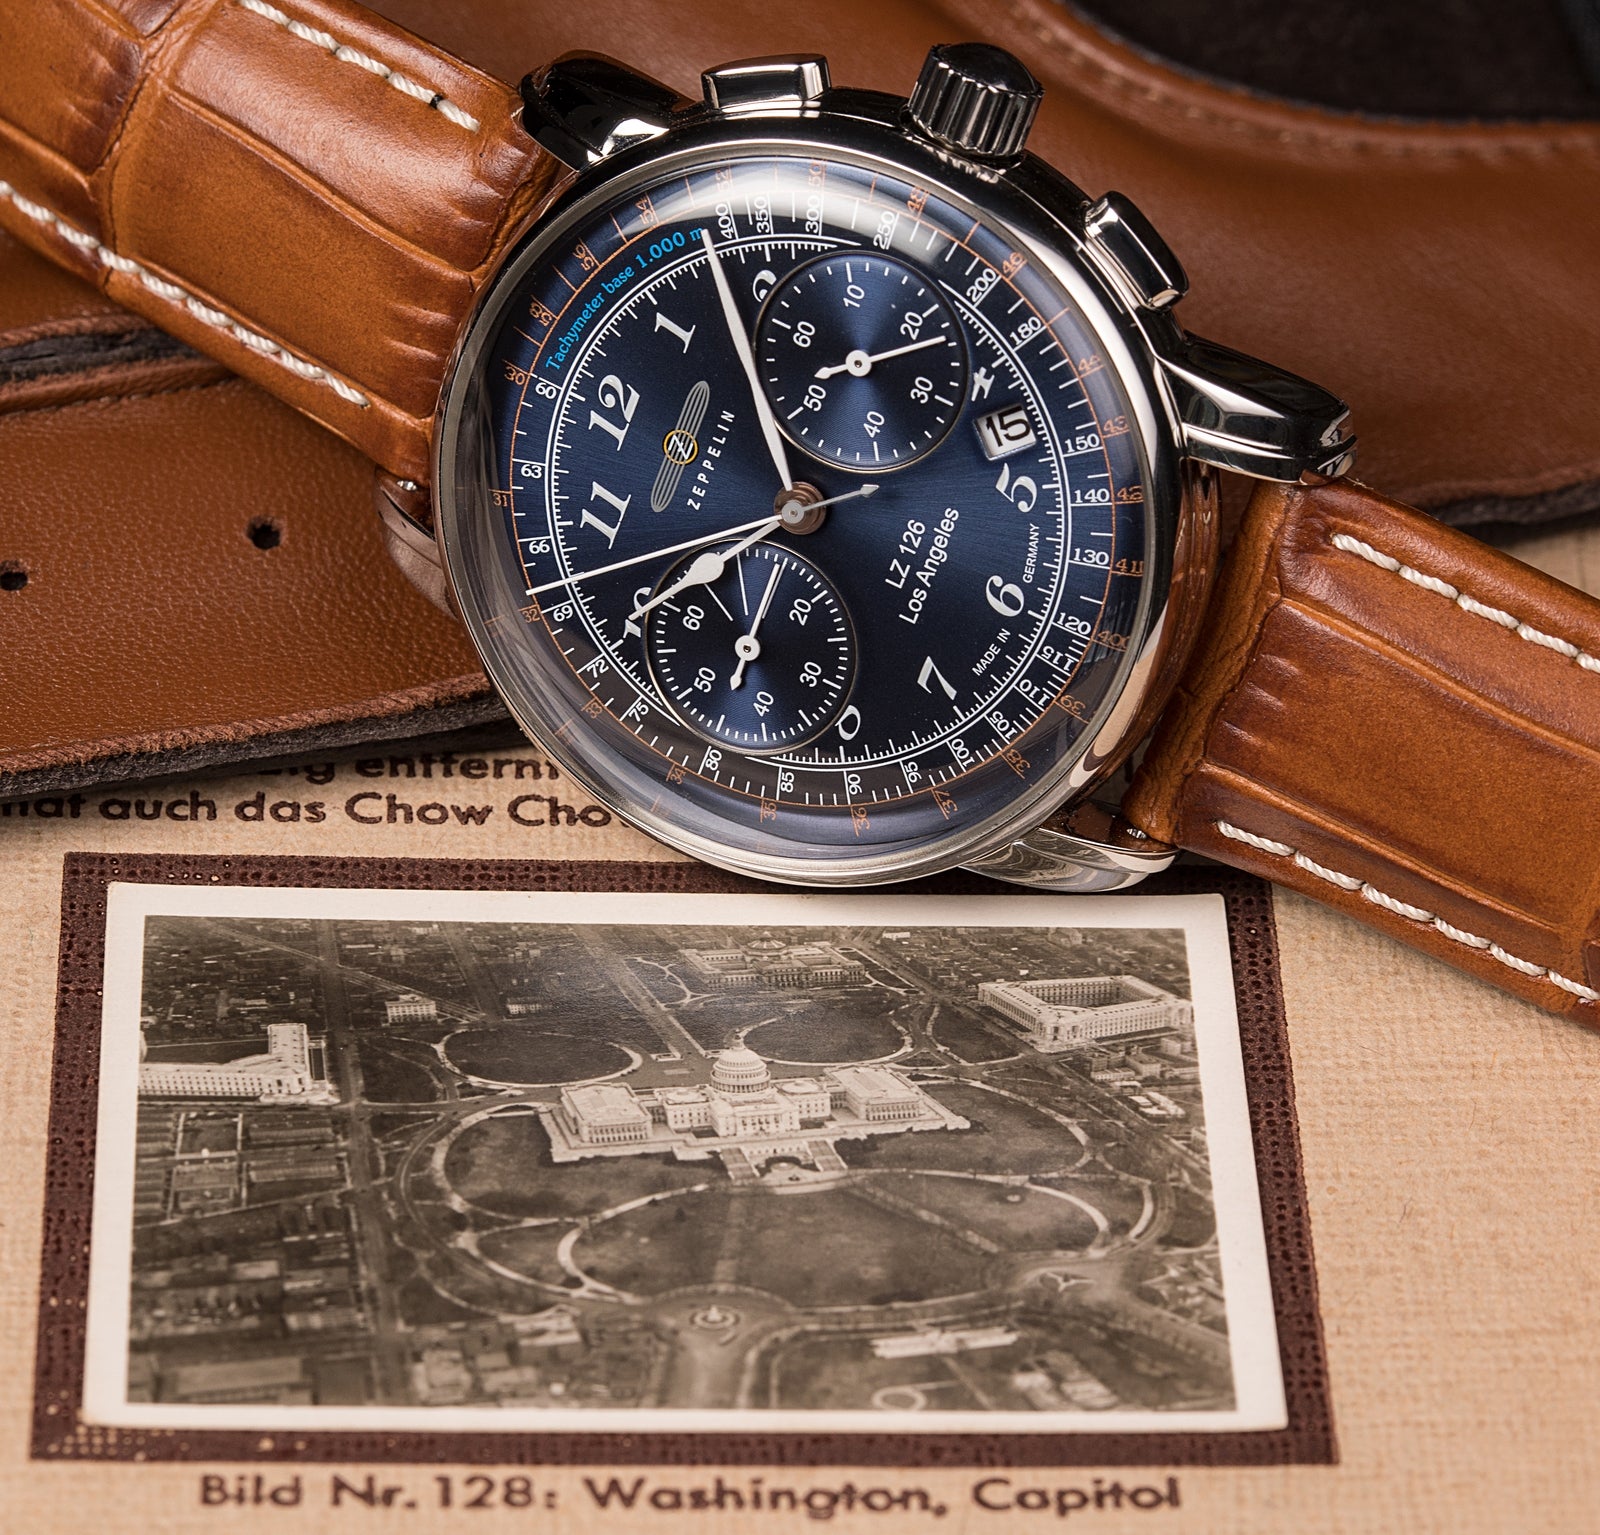 ZEPPELIN news: Zeppelin LZ126 Los Angeles chrono now coming with blue dial  | WatchUSeek Watch Forums